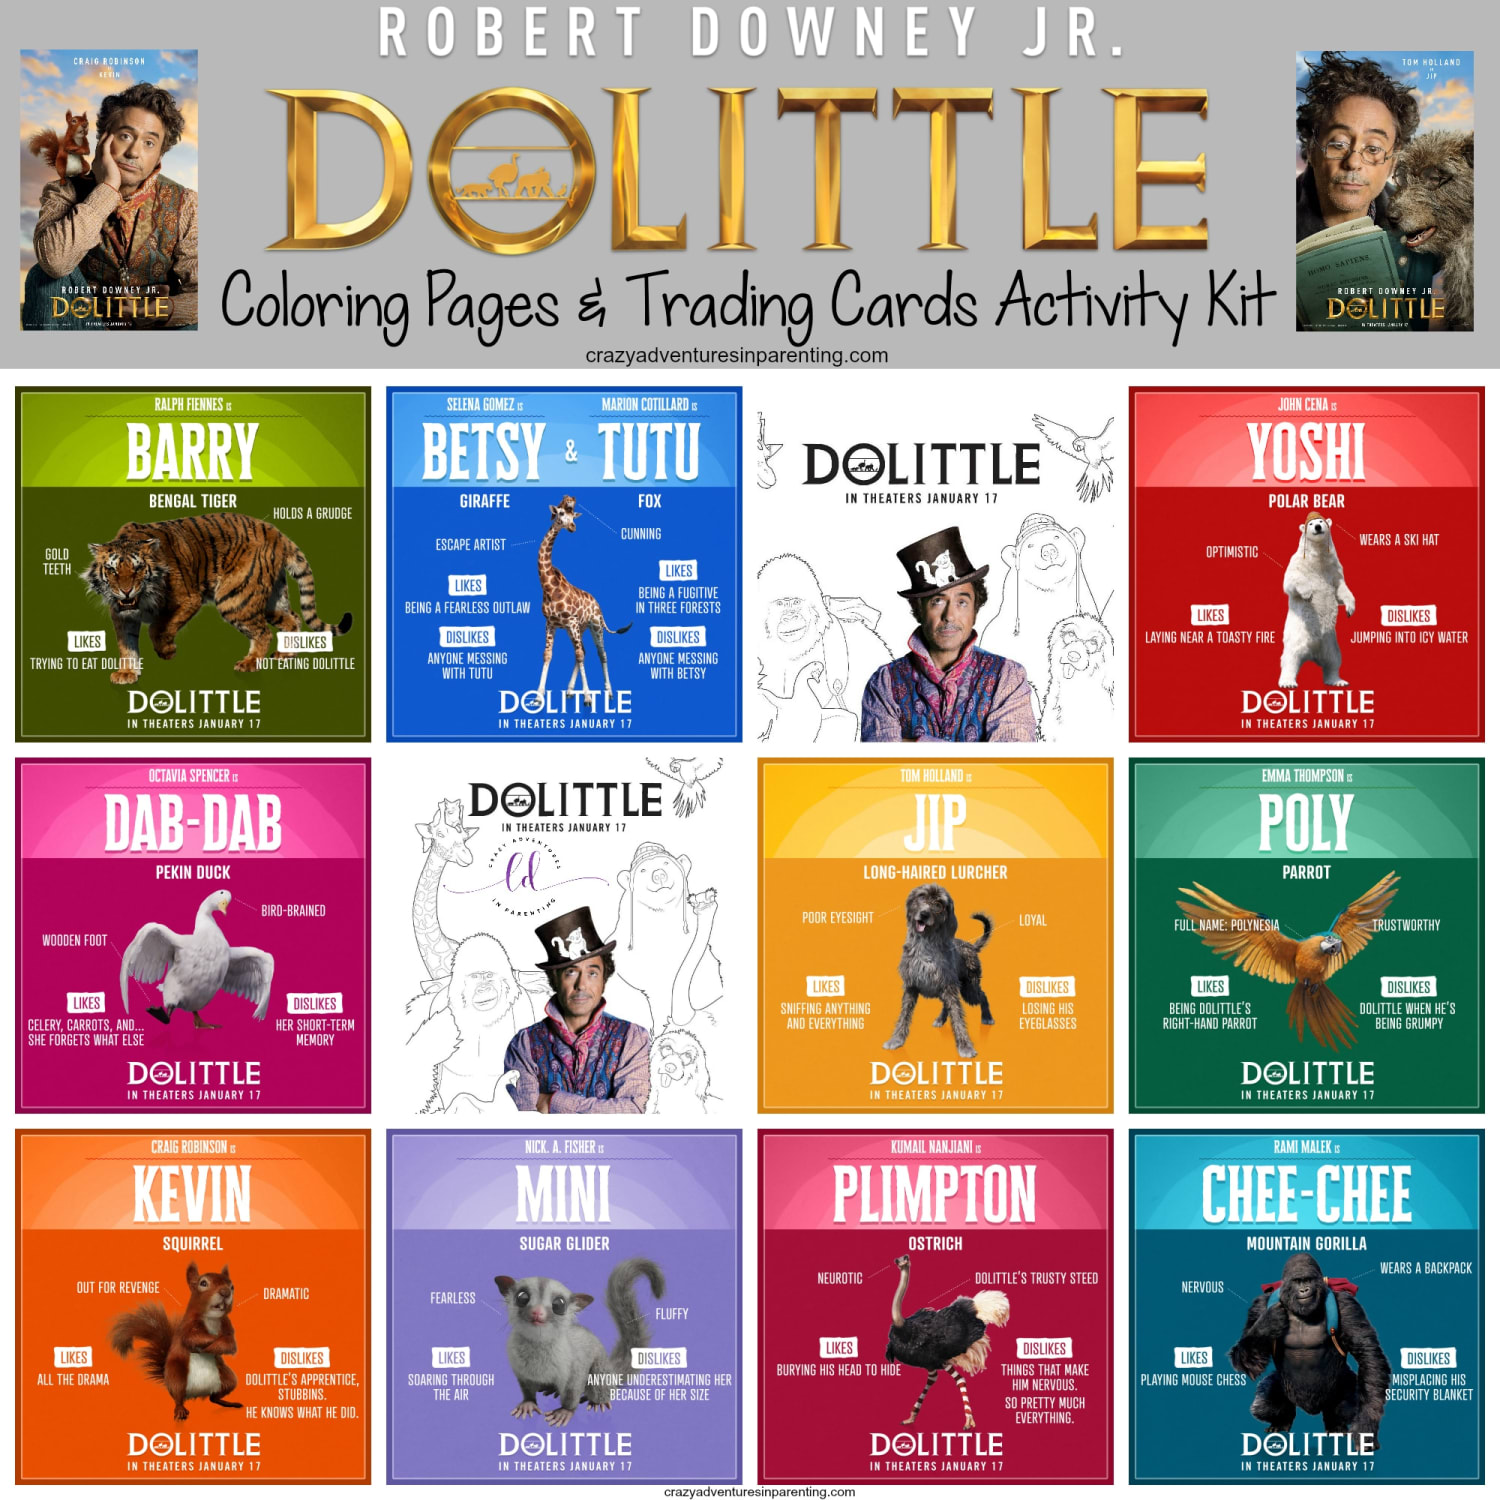 Free Dolittle Coloring Pages and Trading Cards #DolittleMovie